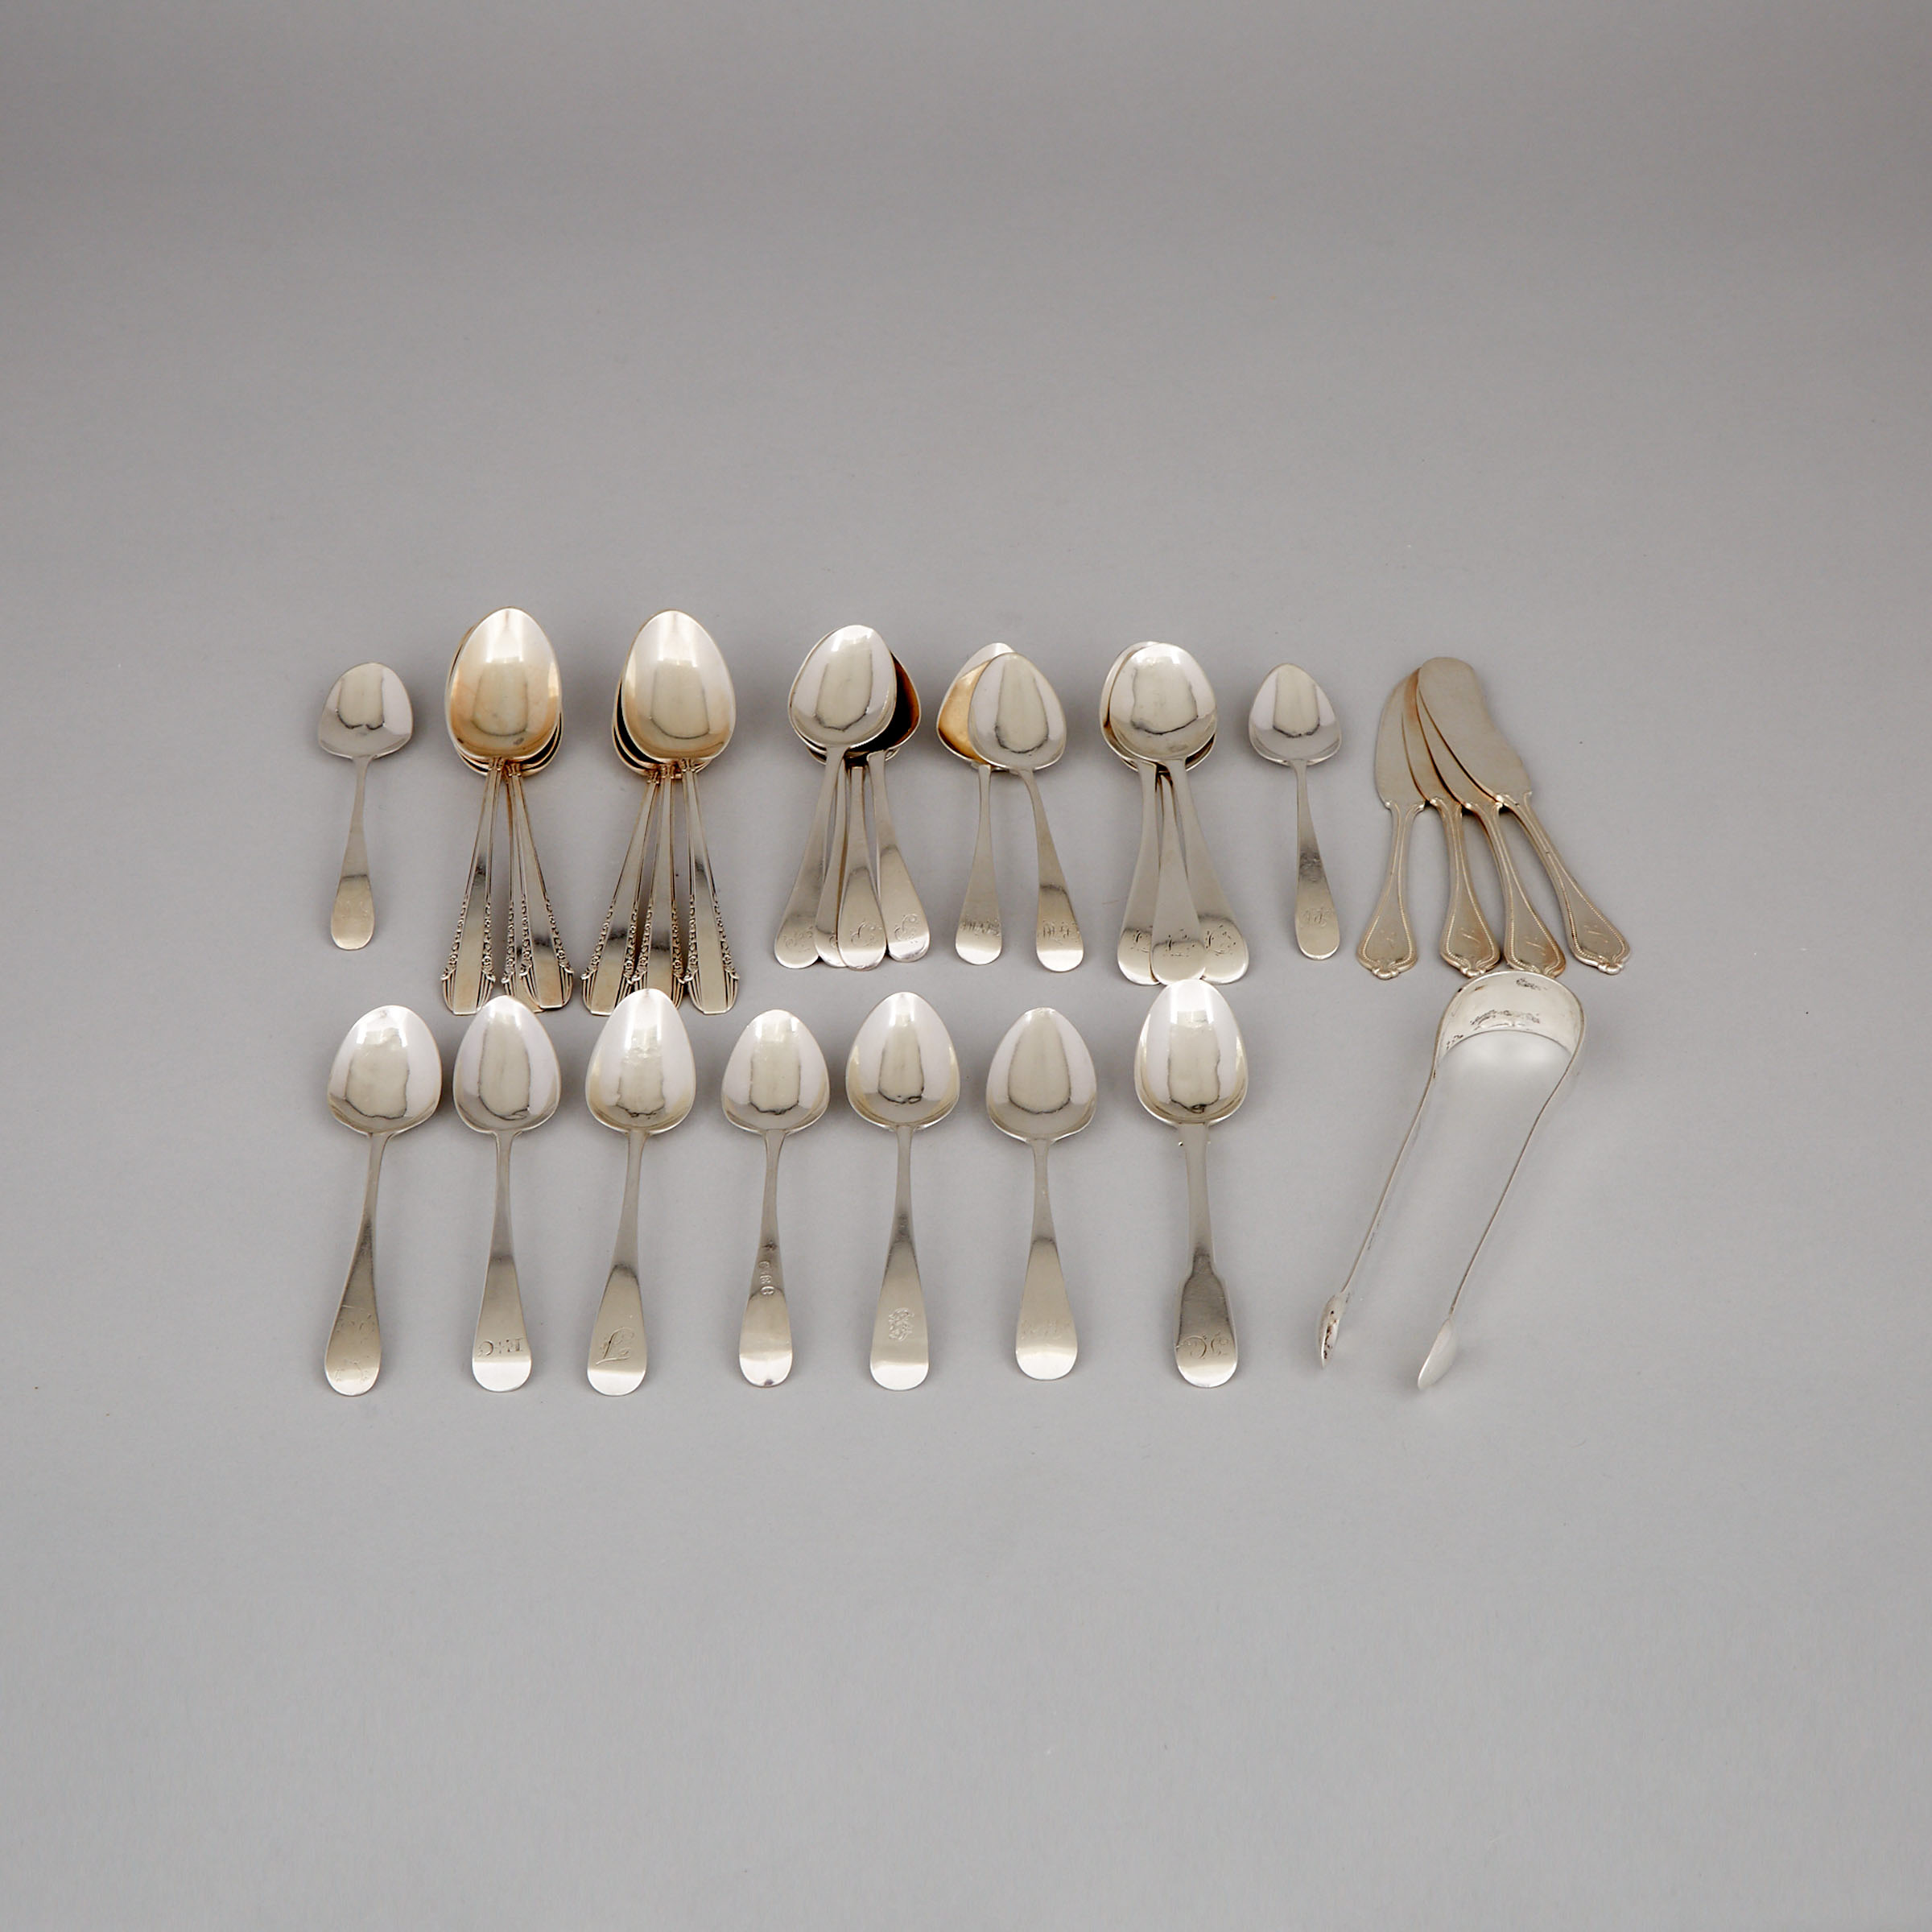 Group of Georgian and American Silver Flatware, early 19th - 20th century